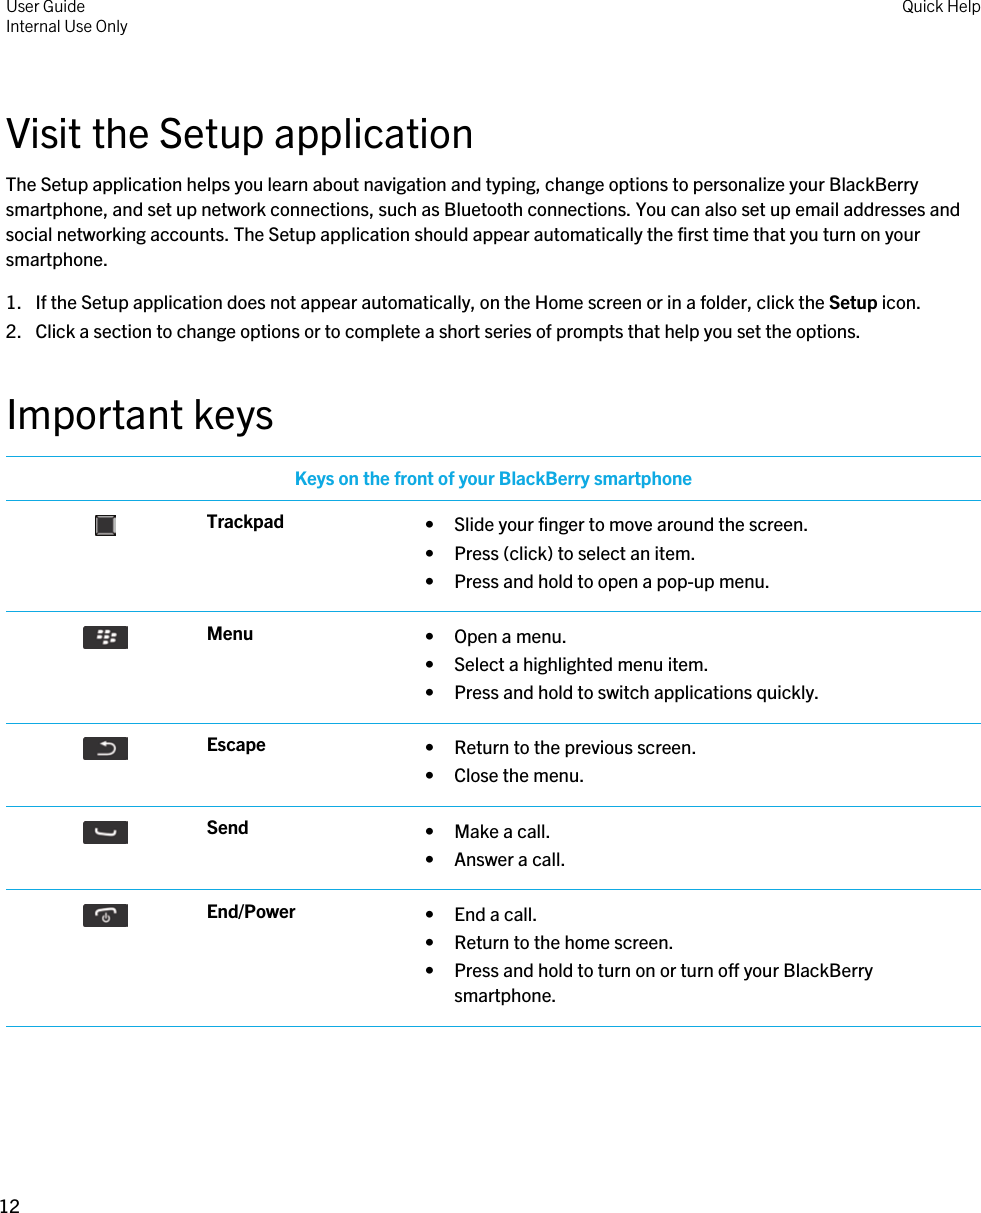 Visit the Setup applicationThe Setup application helps you learn about navigation and typing, change options to personalize your BlackBerry smartphone, and set up network connections, such as Bluetooth connections. You can also set up email addresses and social networking accounts. The Setup application should appear automatically the first time that you turn on your smartphone.1. If the Setup application does not appear automatically, on the Home screen or in a folder, click the Setup icon.2. Click a section to change options or to complete a short series of prompts that help you set the options.Important keysKeys on the front of your BlackBerry smartphone Trackpad • Slide your finger to move around the screen.• Press (click) to select an item.• Press and hold to open a pop-up menu. Menu • Open a menu.• Select a highlighted menu item.• Press and hold to switch applications quickly. Escape • Return to the previous screen.• Close the menu. Send • Make a call.• Answer a call. End/Power • End a call.• Return to the home screen.• Press and hold to turn on or turn off your BlackBerry smartphone.User GuideInternal Use Only Quick Help12 